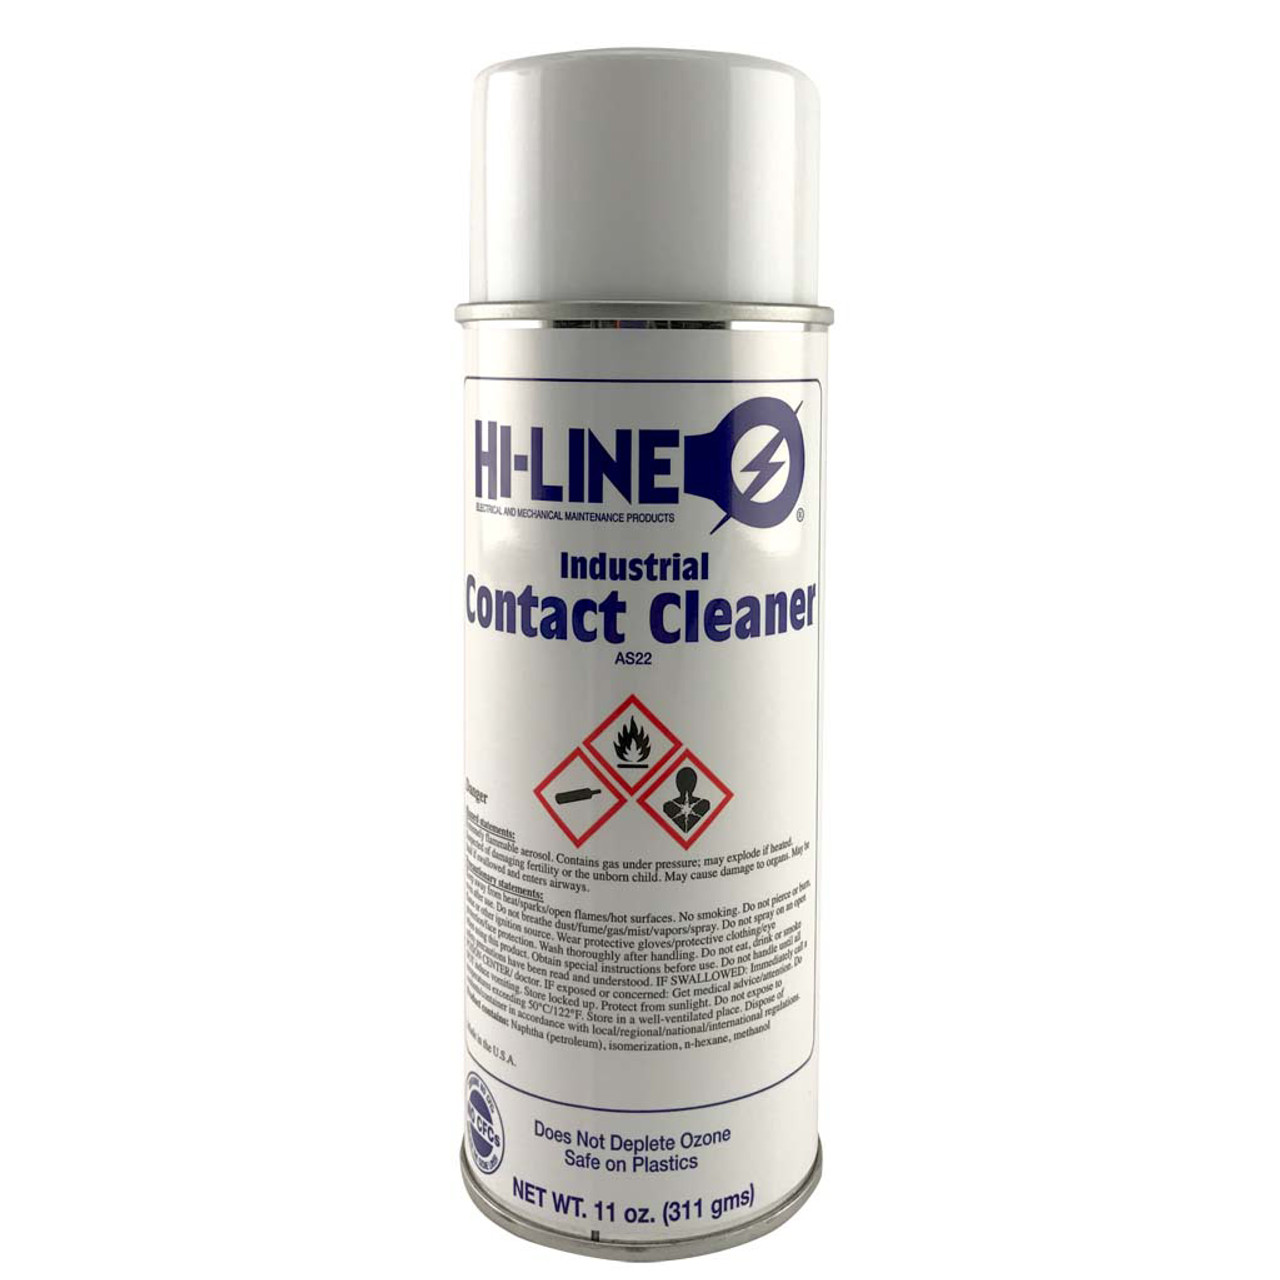 E-Line Contact Cleaner, Powerful & Economical